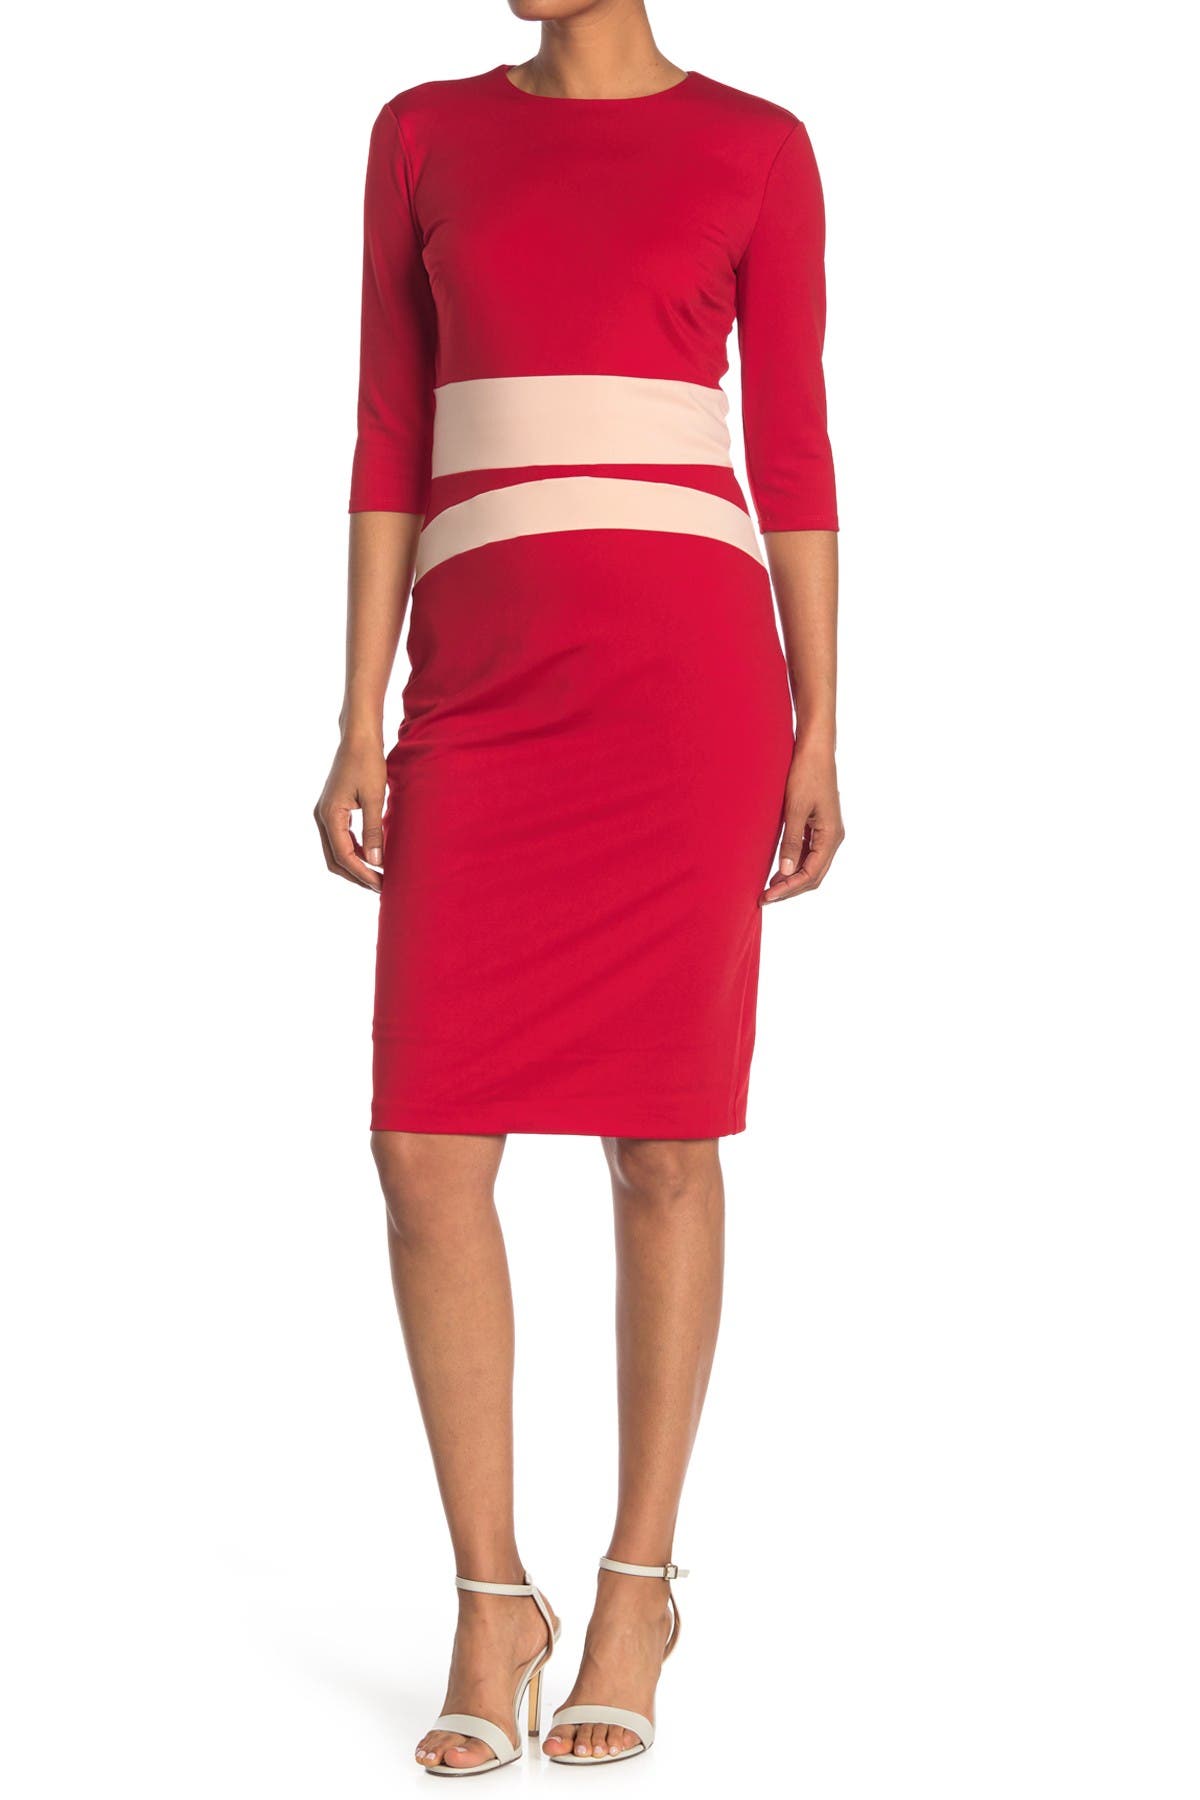 Alexia Admor Elbow Sleeve Colorblock Sheath Dress In Light/pastel Red8